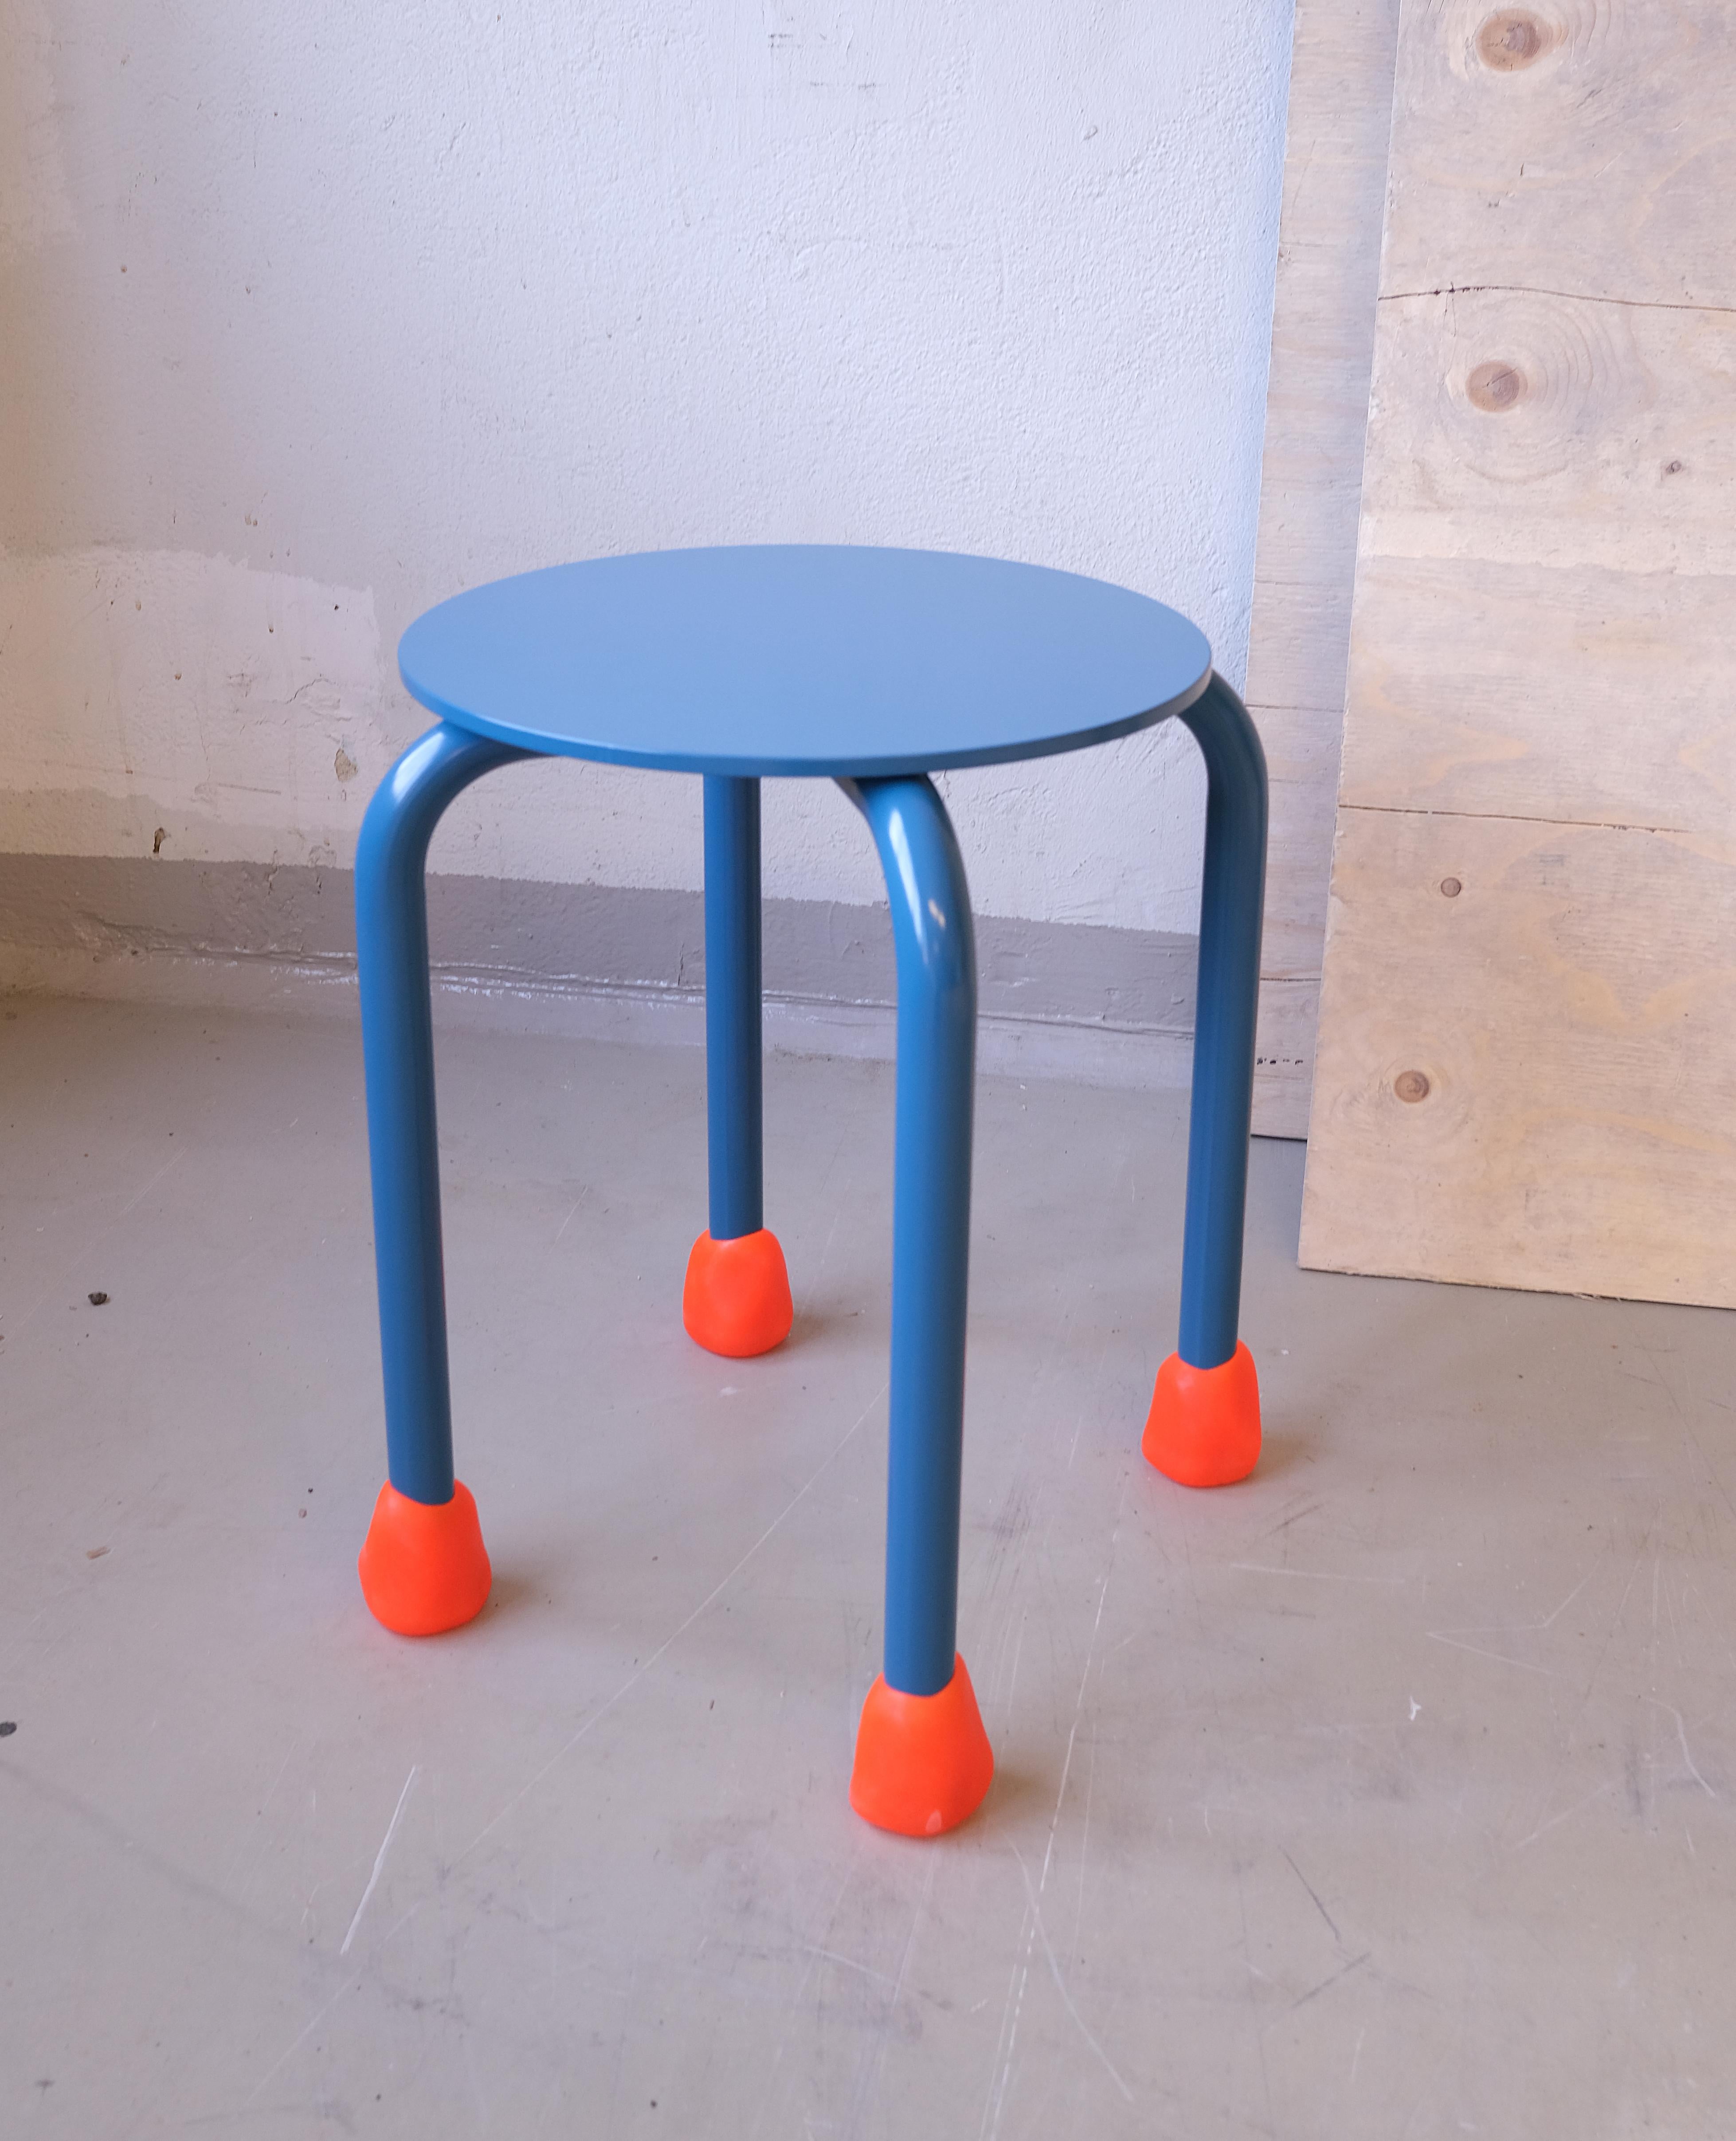 Soft Rubber stool made in aluminum and casted rubber feets in neon orange.